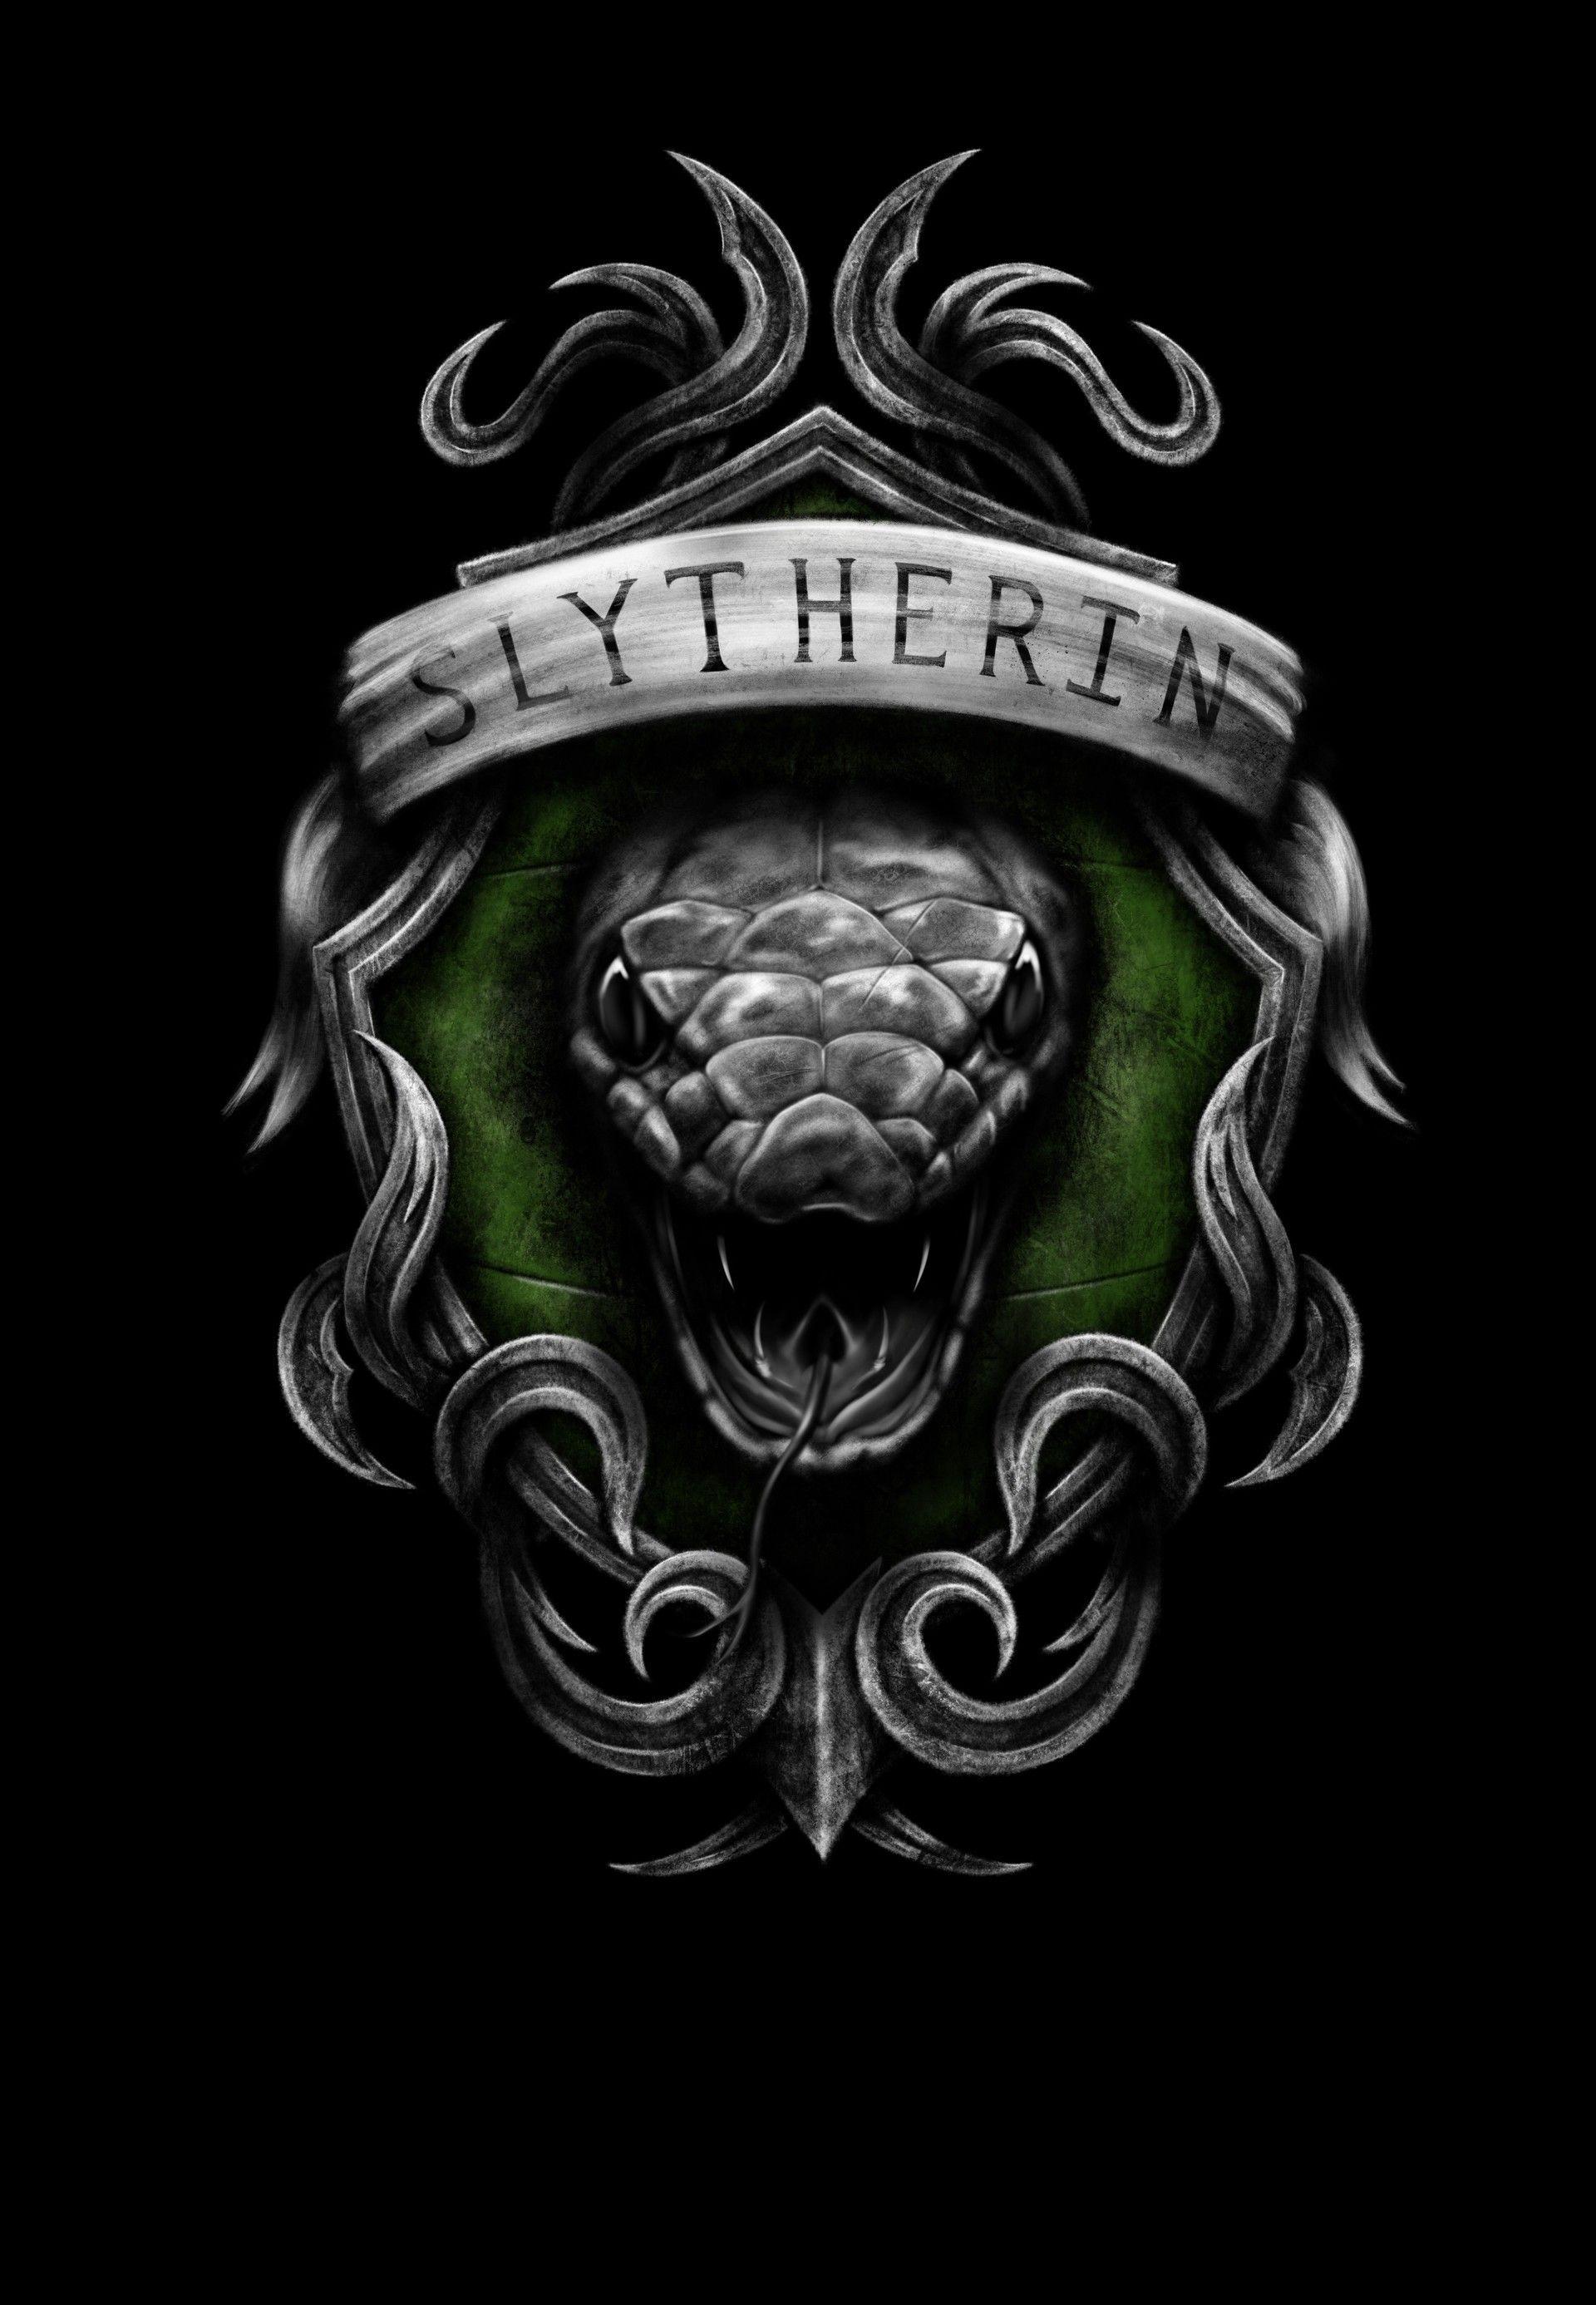 slytherin wappen wallpapers wallpaper cave on slytherin wappen wallpaper